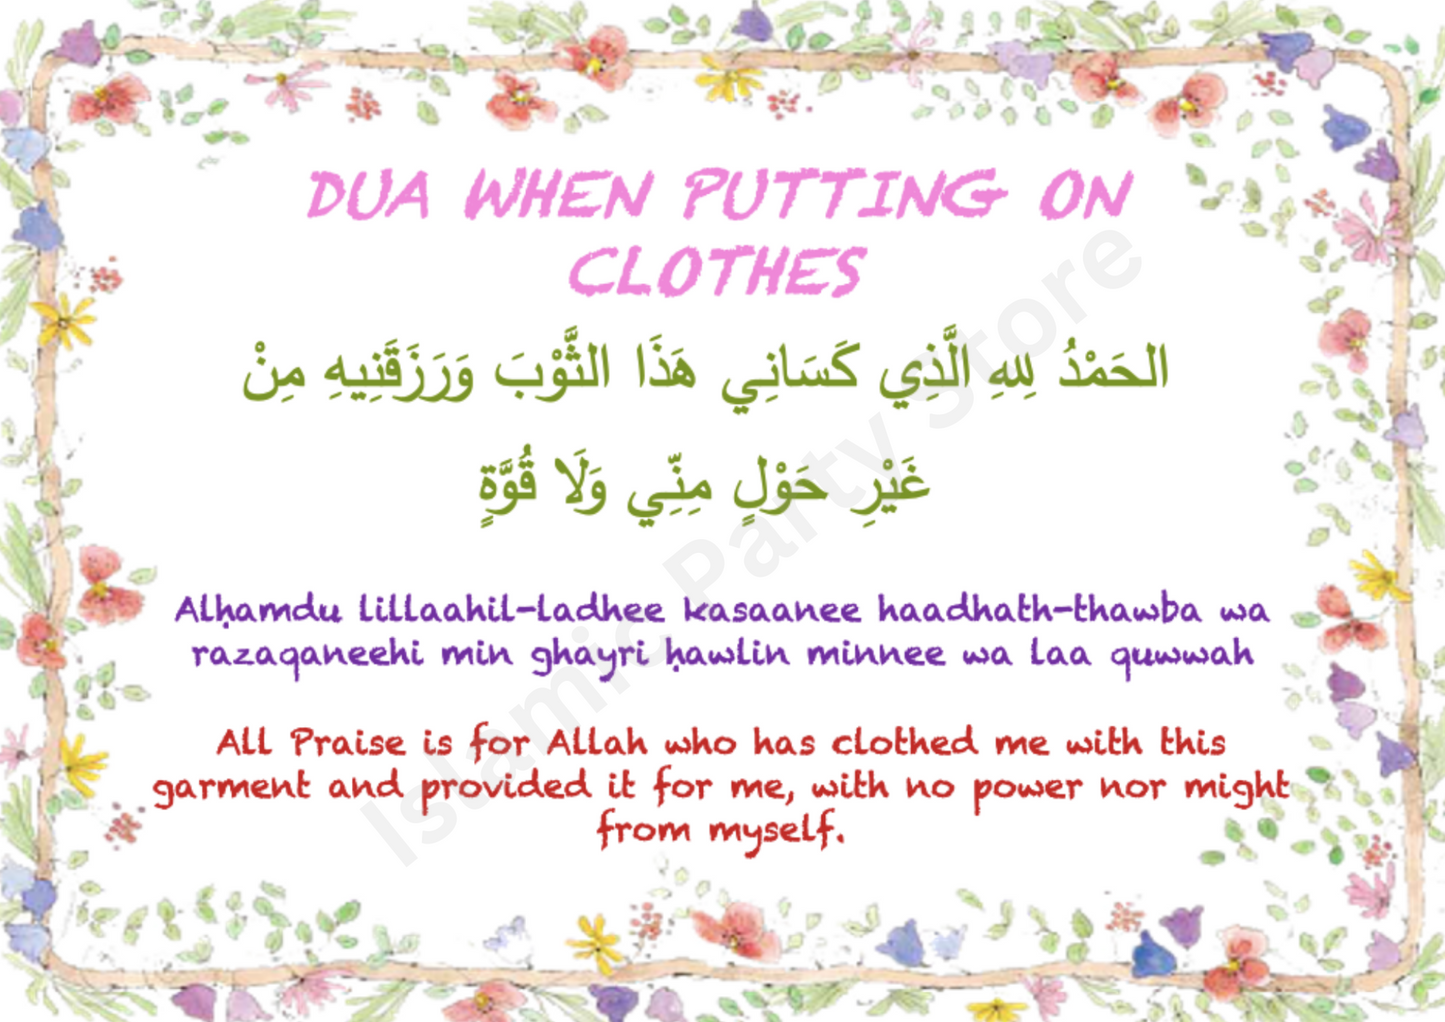 Putting On Clothes Dua